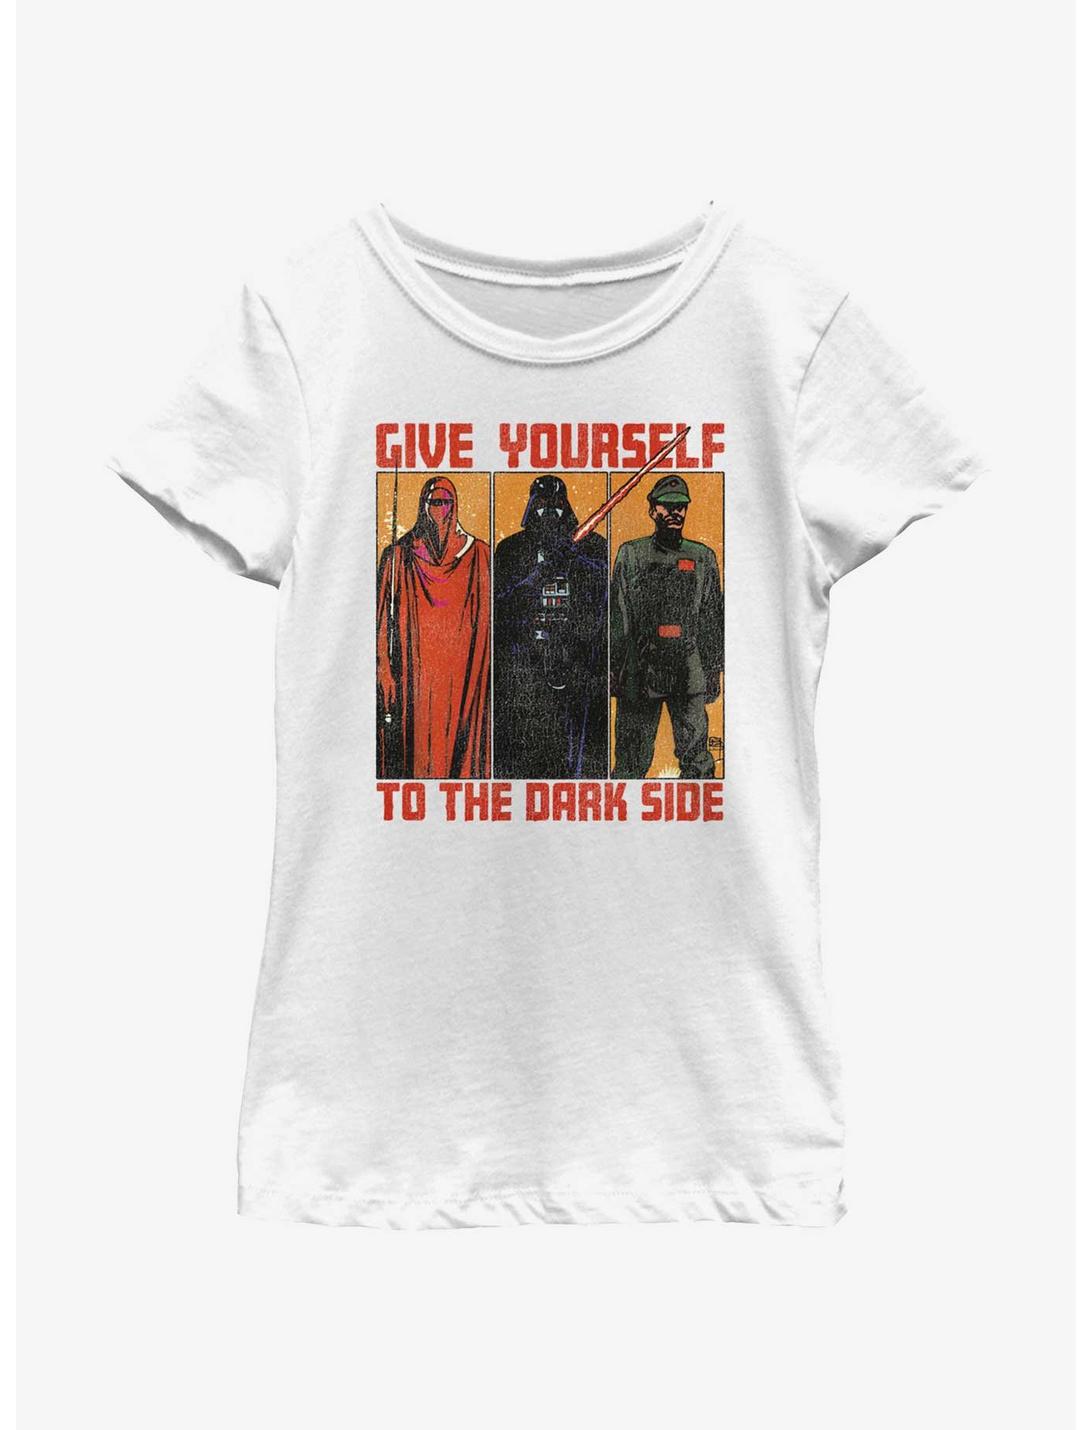 Star Wars Return Of The Jedi Give Yourself To The Dark Side Youth Girls T-Shirt, WHITE, hi-res